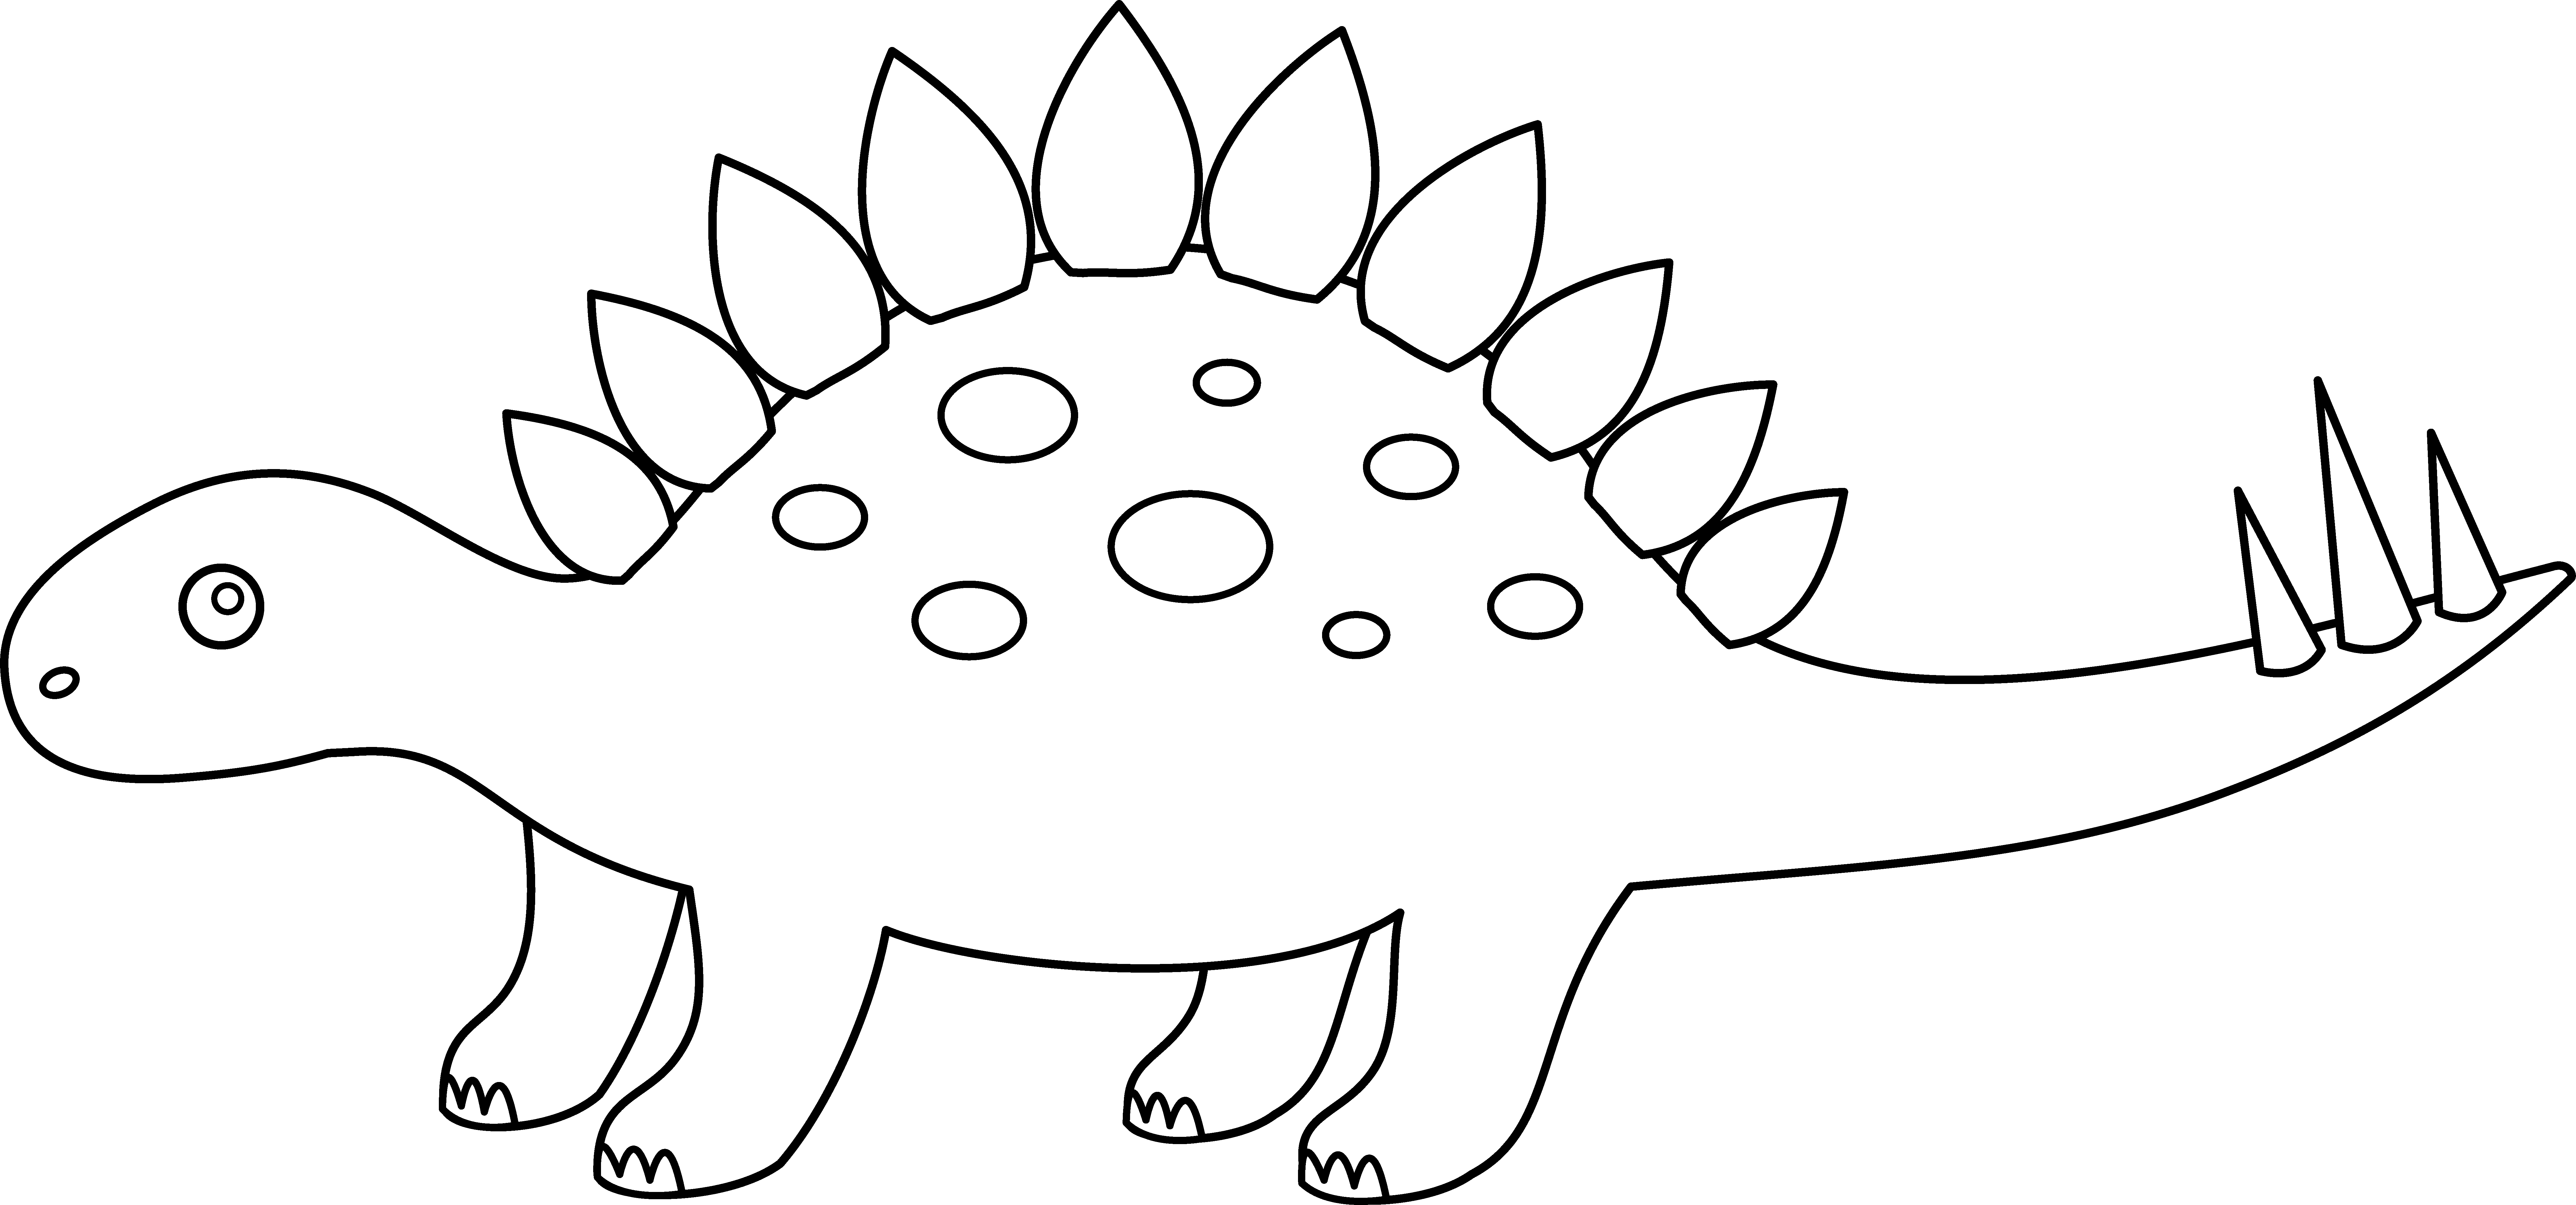 Outline Of Dinosaur - Clipart library